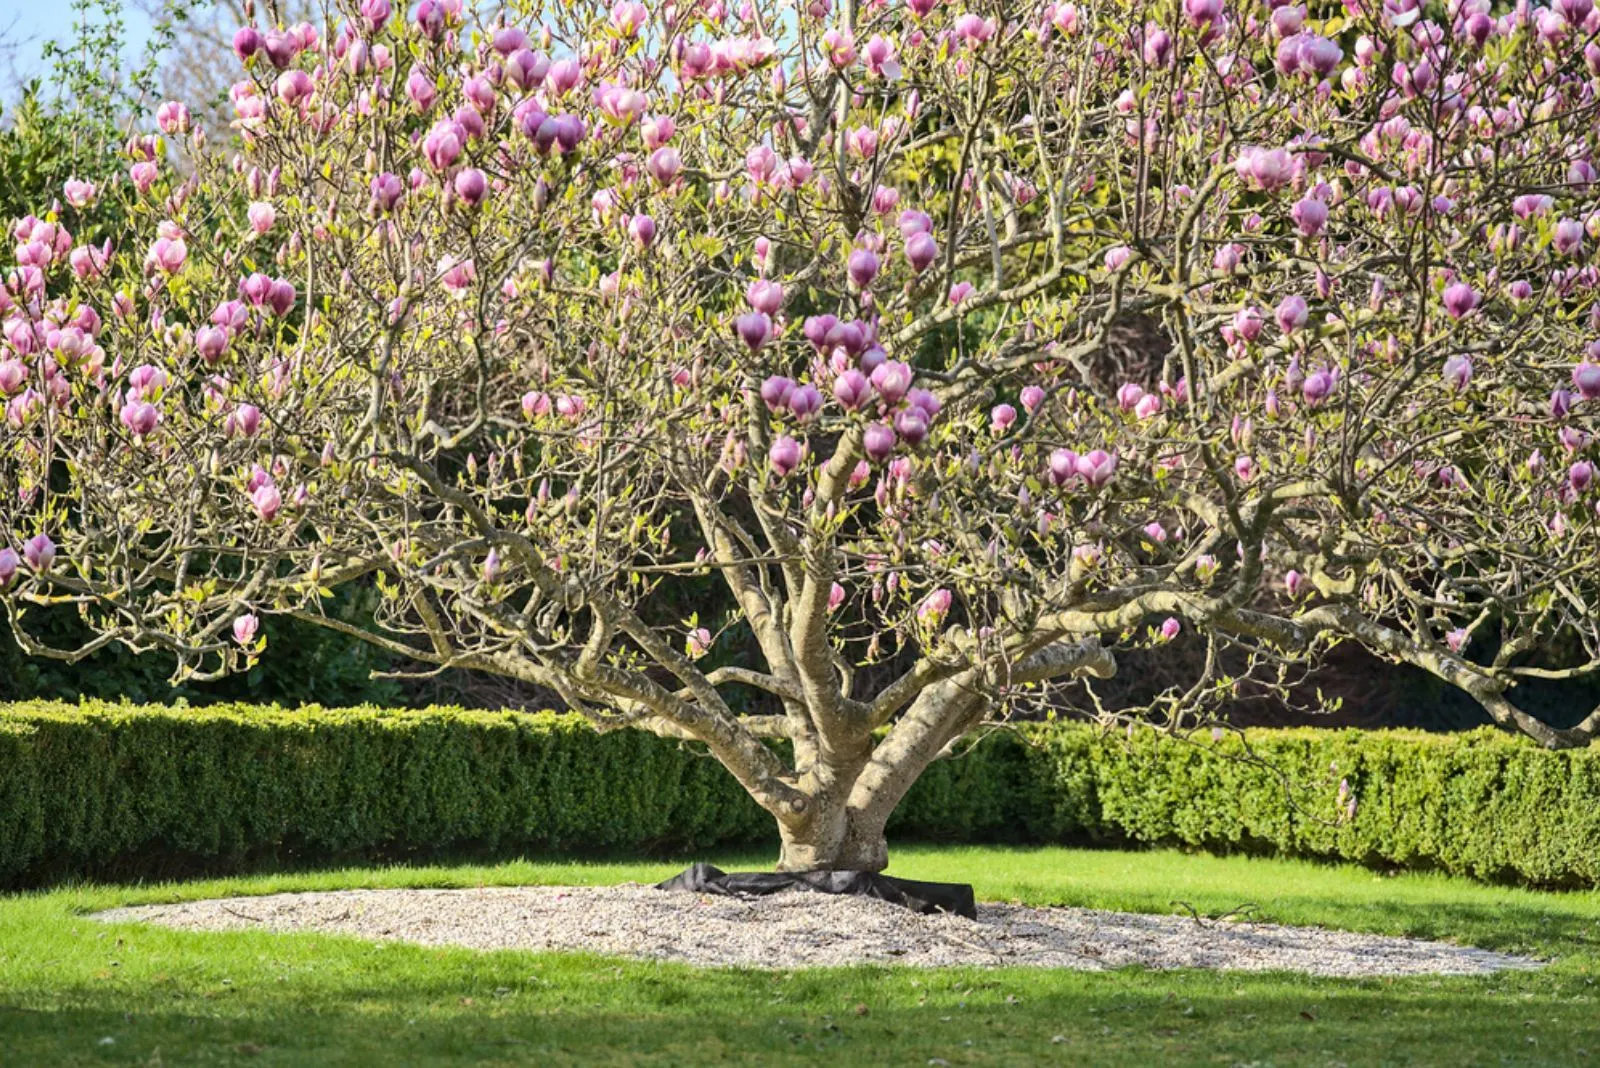 Saucer Magnolia planted in the garden